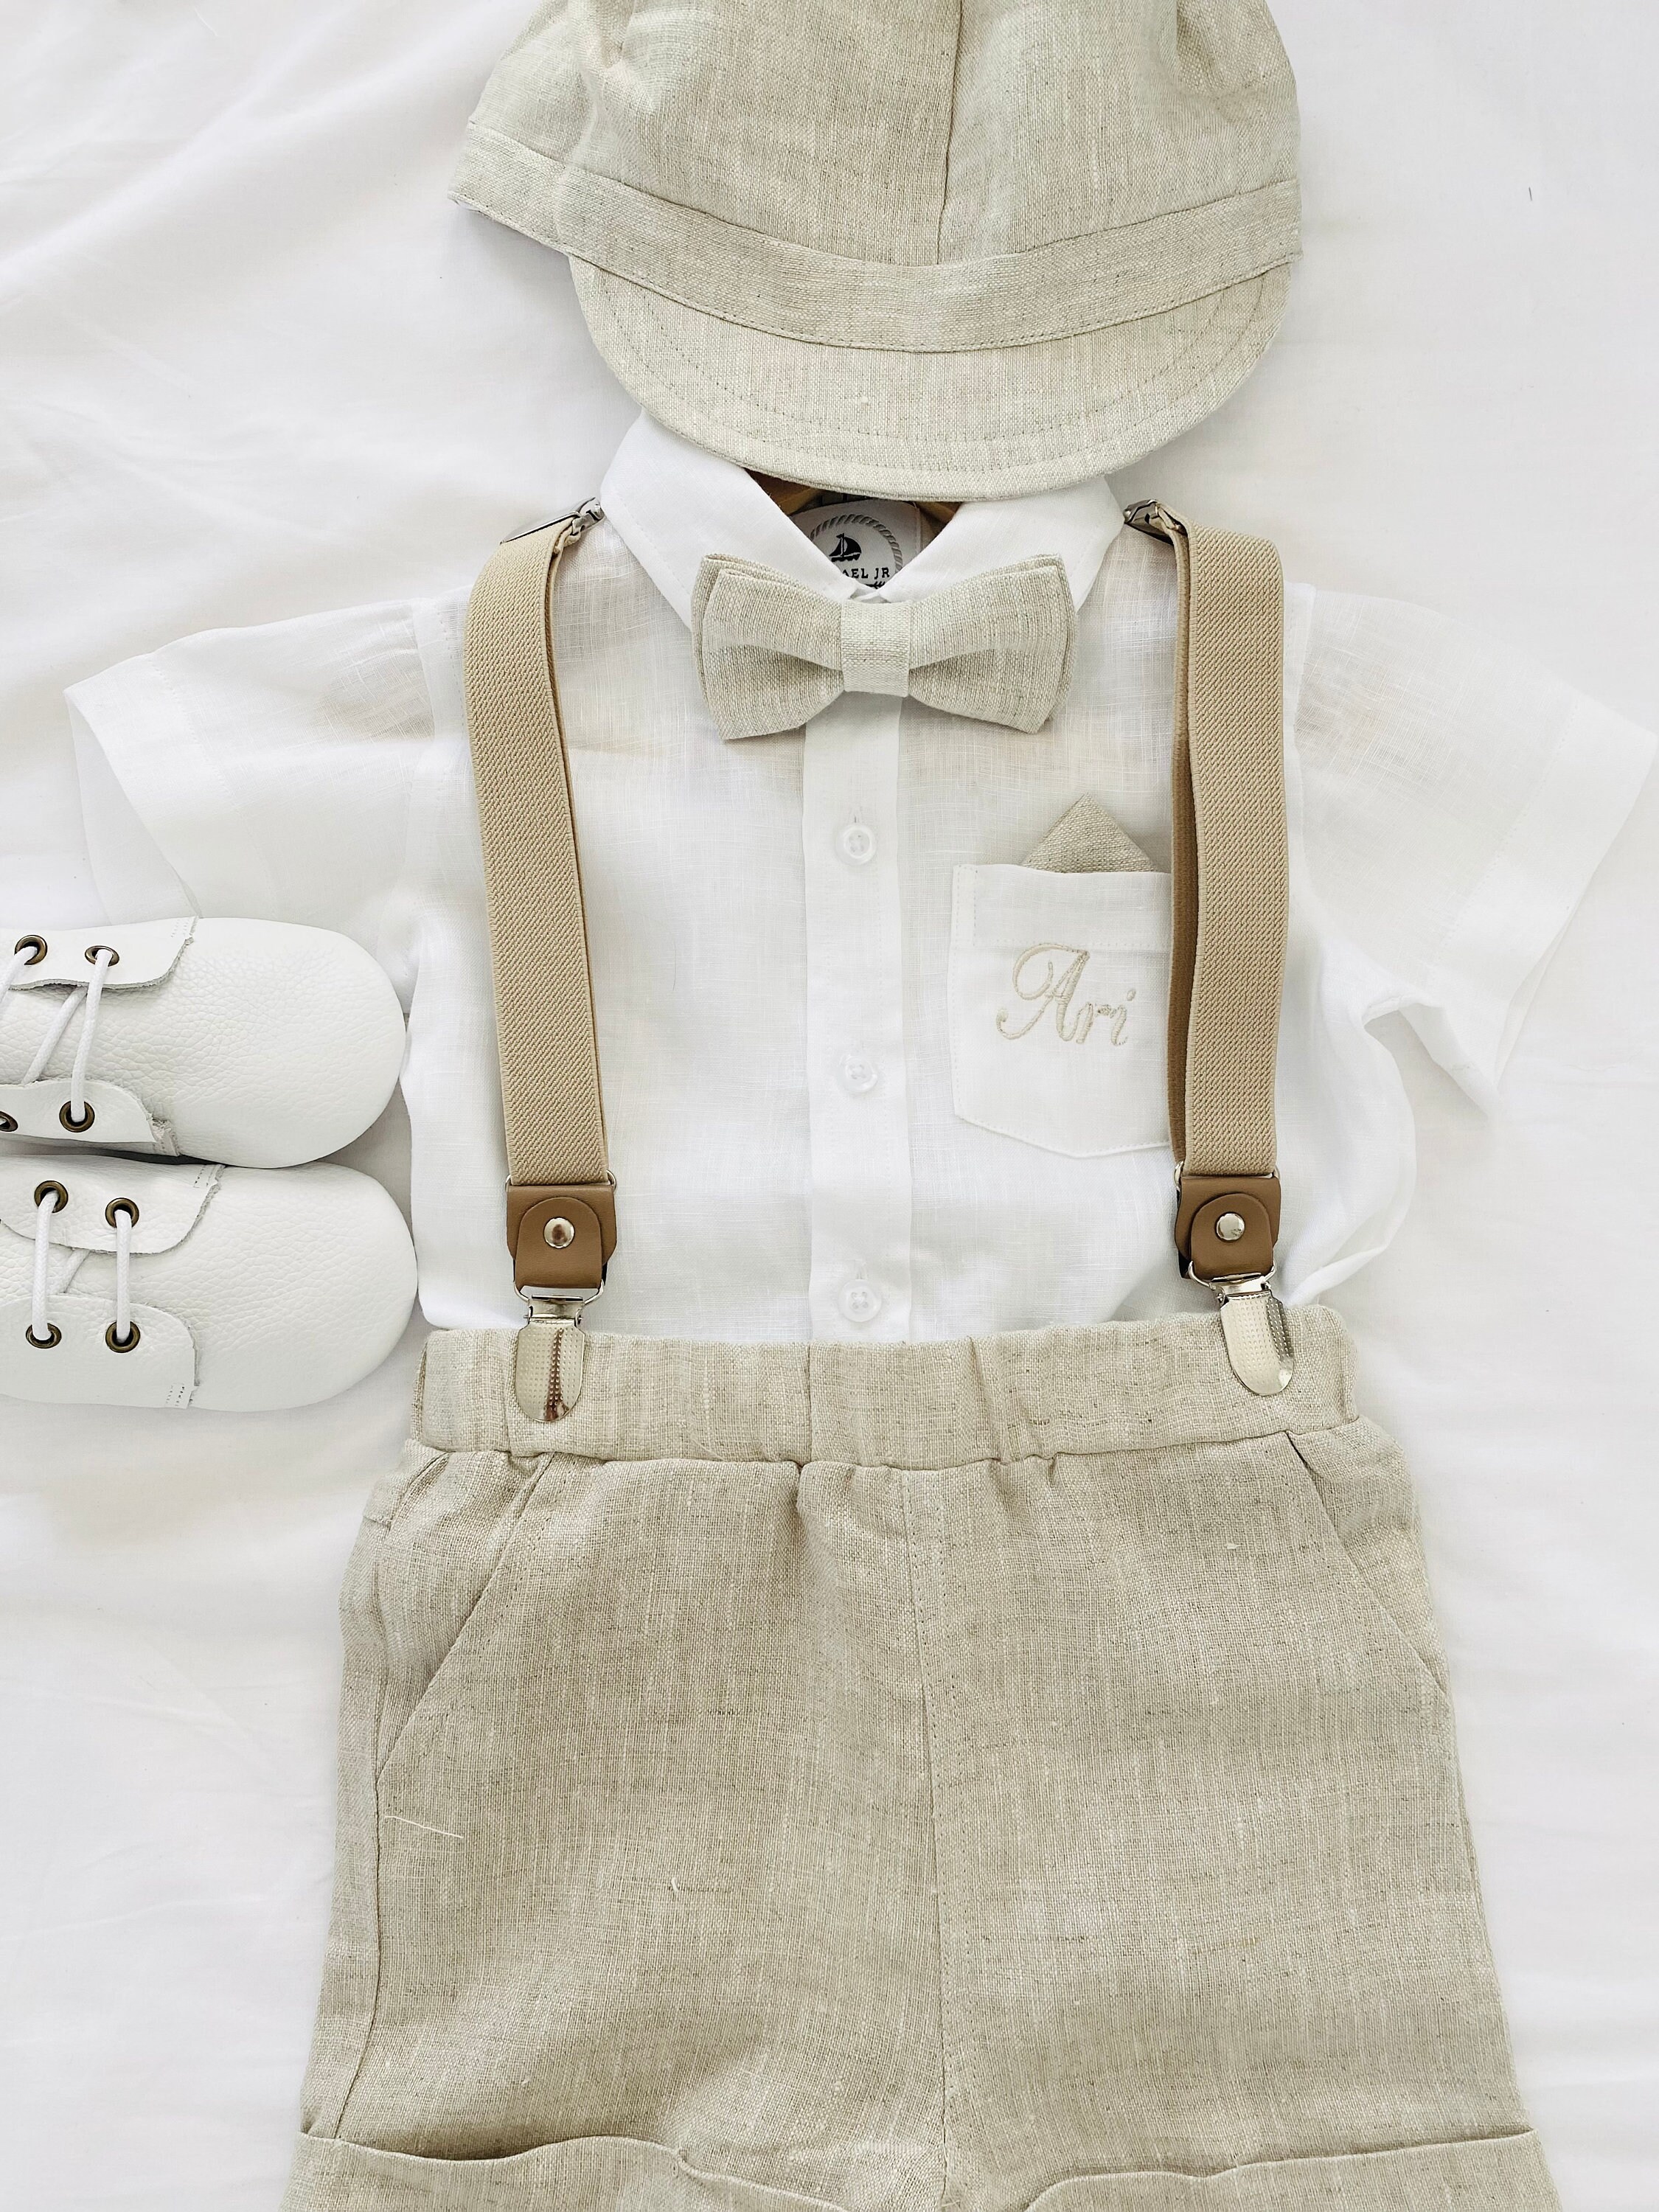 Boys White Linen Shirt Beige Linen Pants and Suspenders and | Etsy